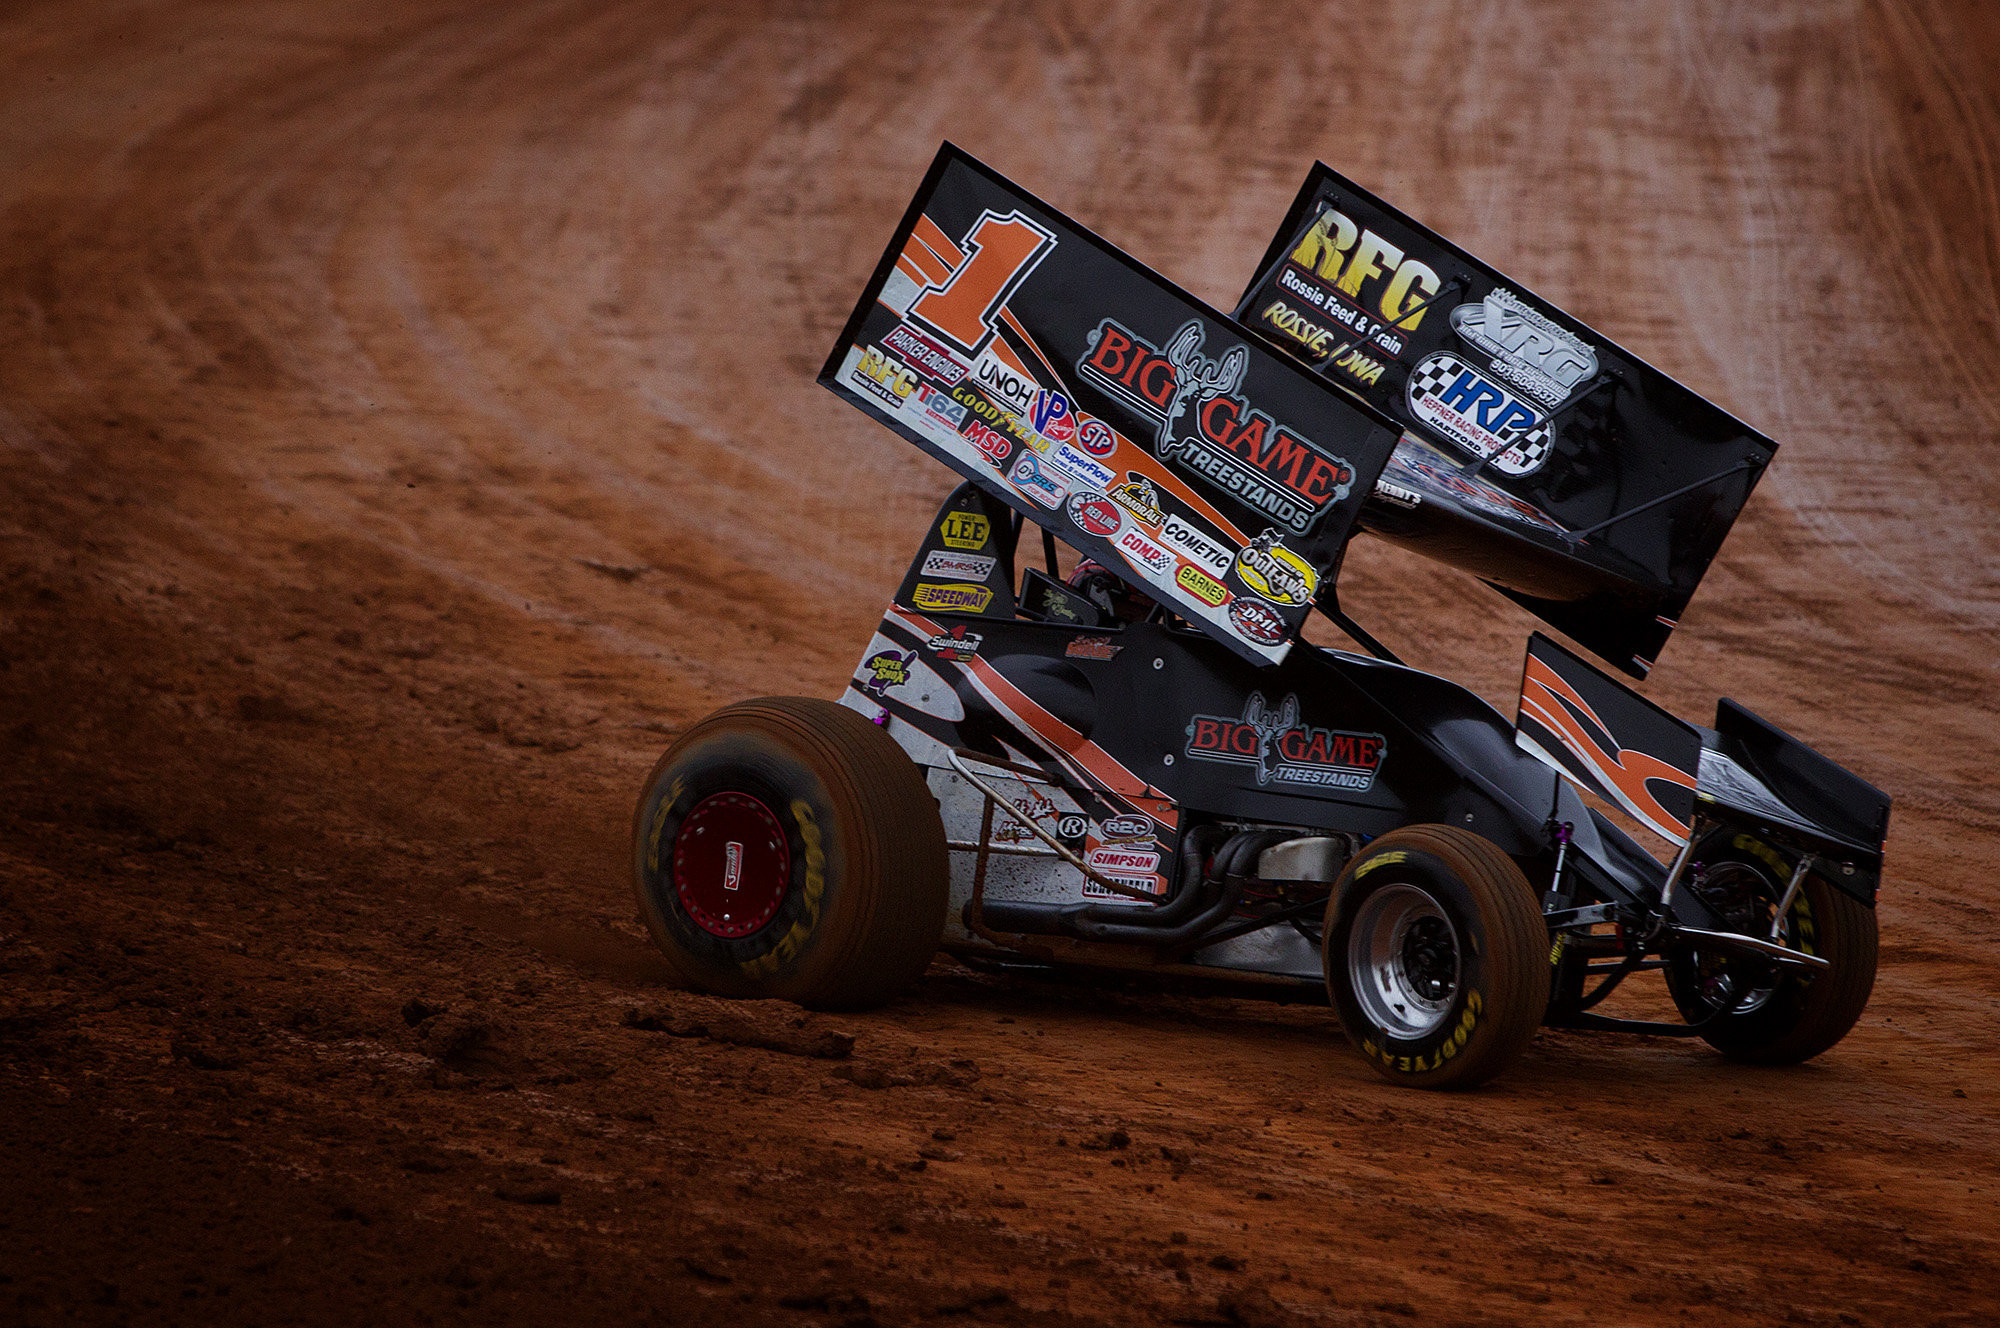 2000x1328 Car racing have helped the locals compete with the World of Outlaws .